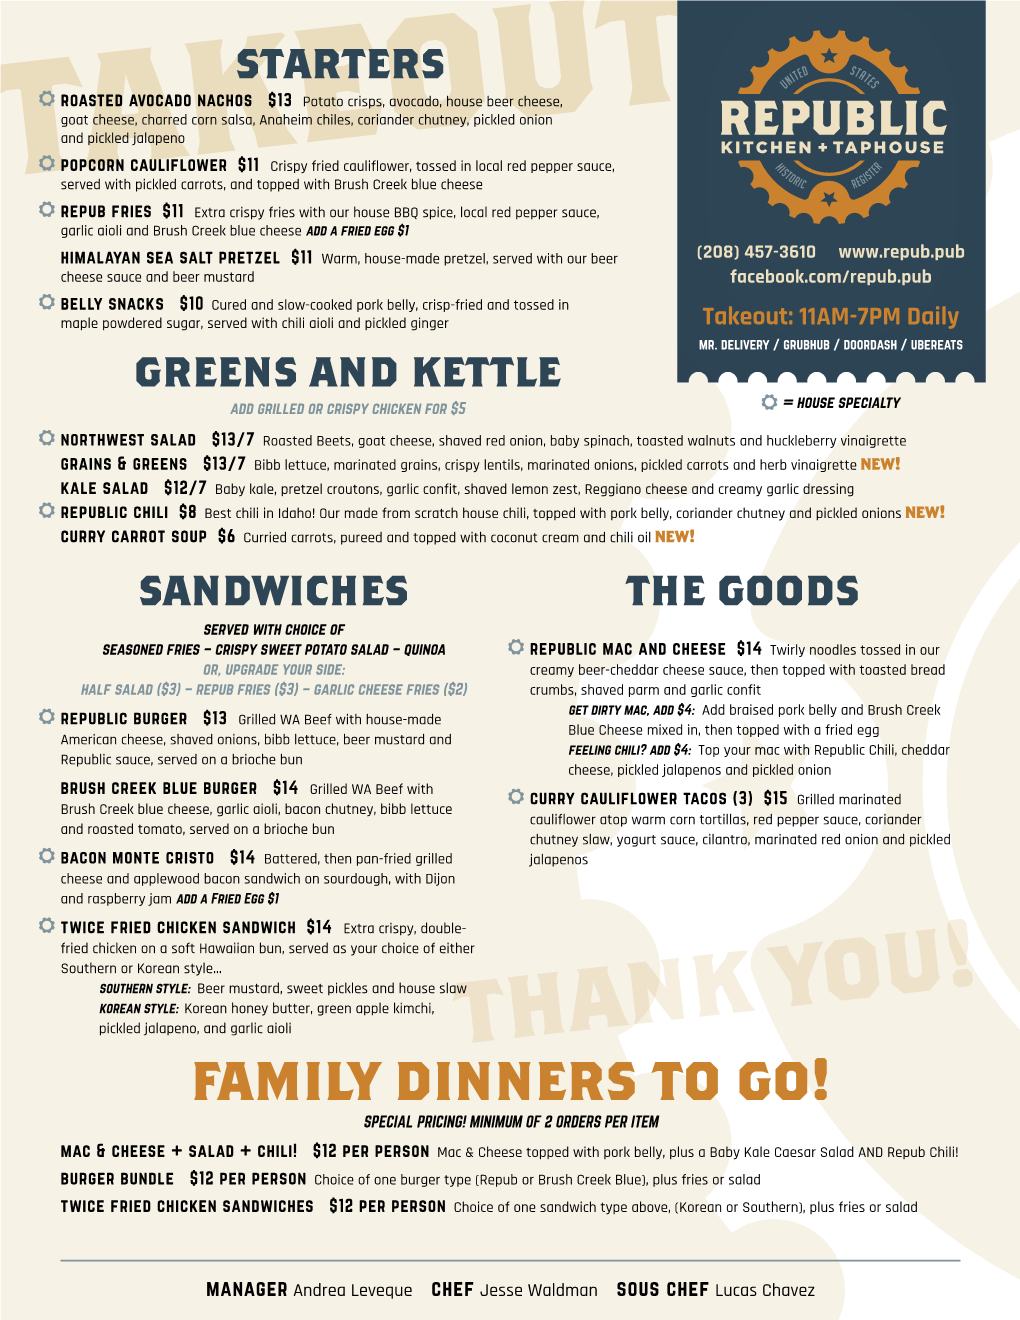 Thank You! Family Dinners to Go! SPECIAL PRICING! MINIMUM of 2 ORDERS PER ITEM